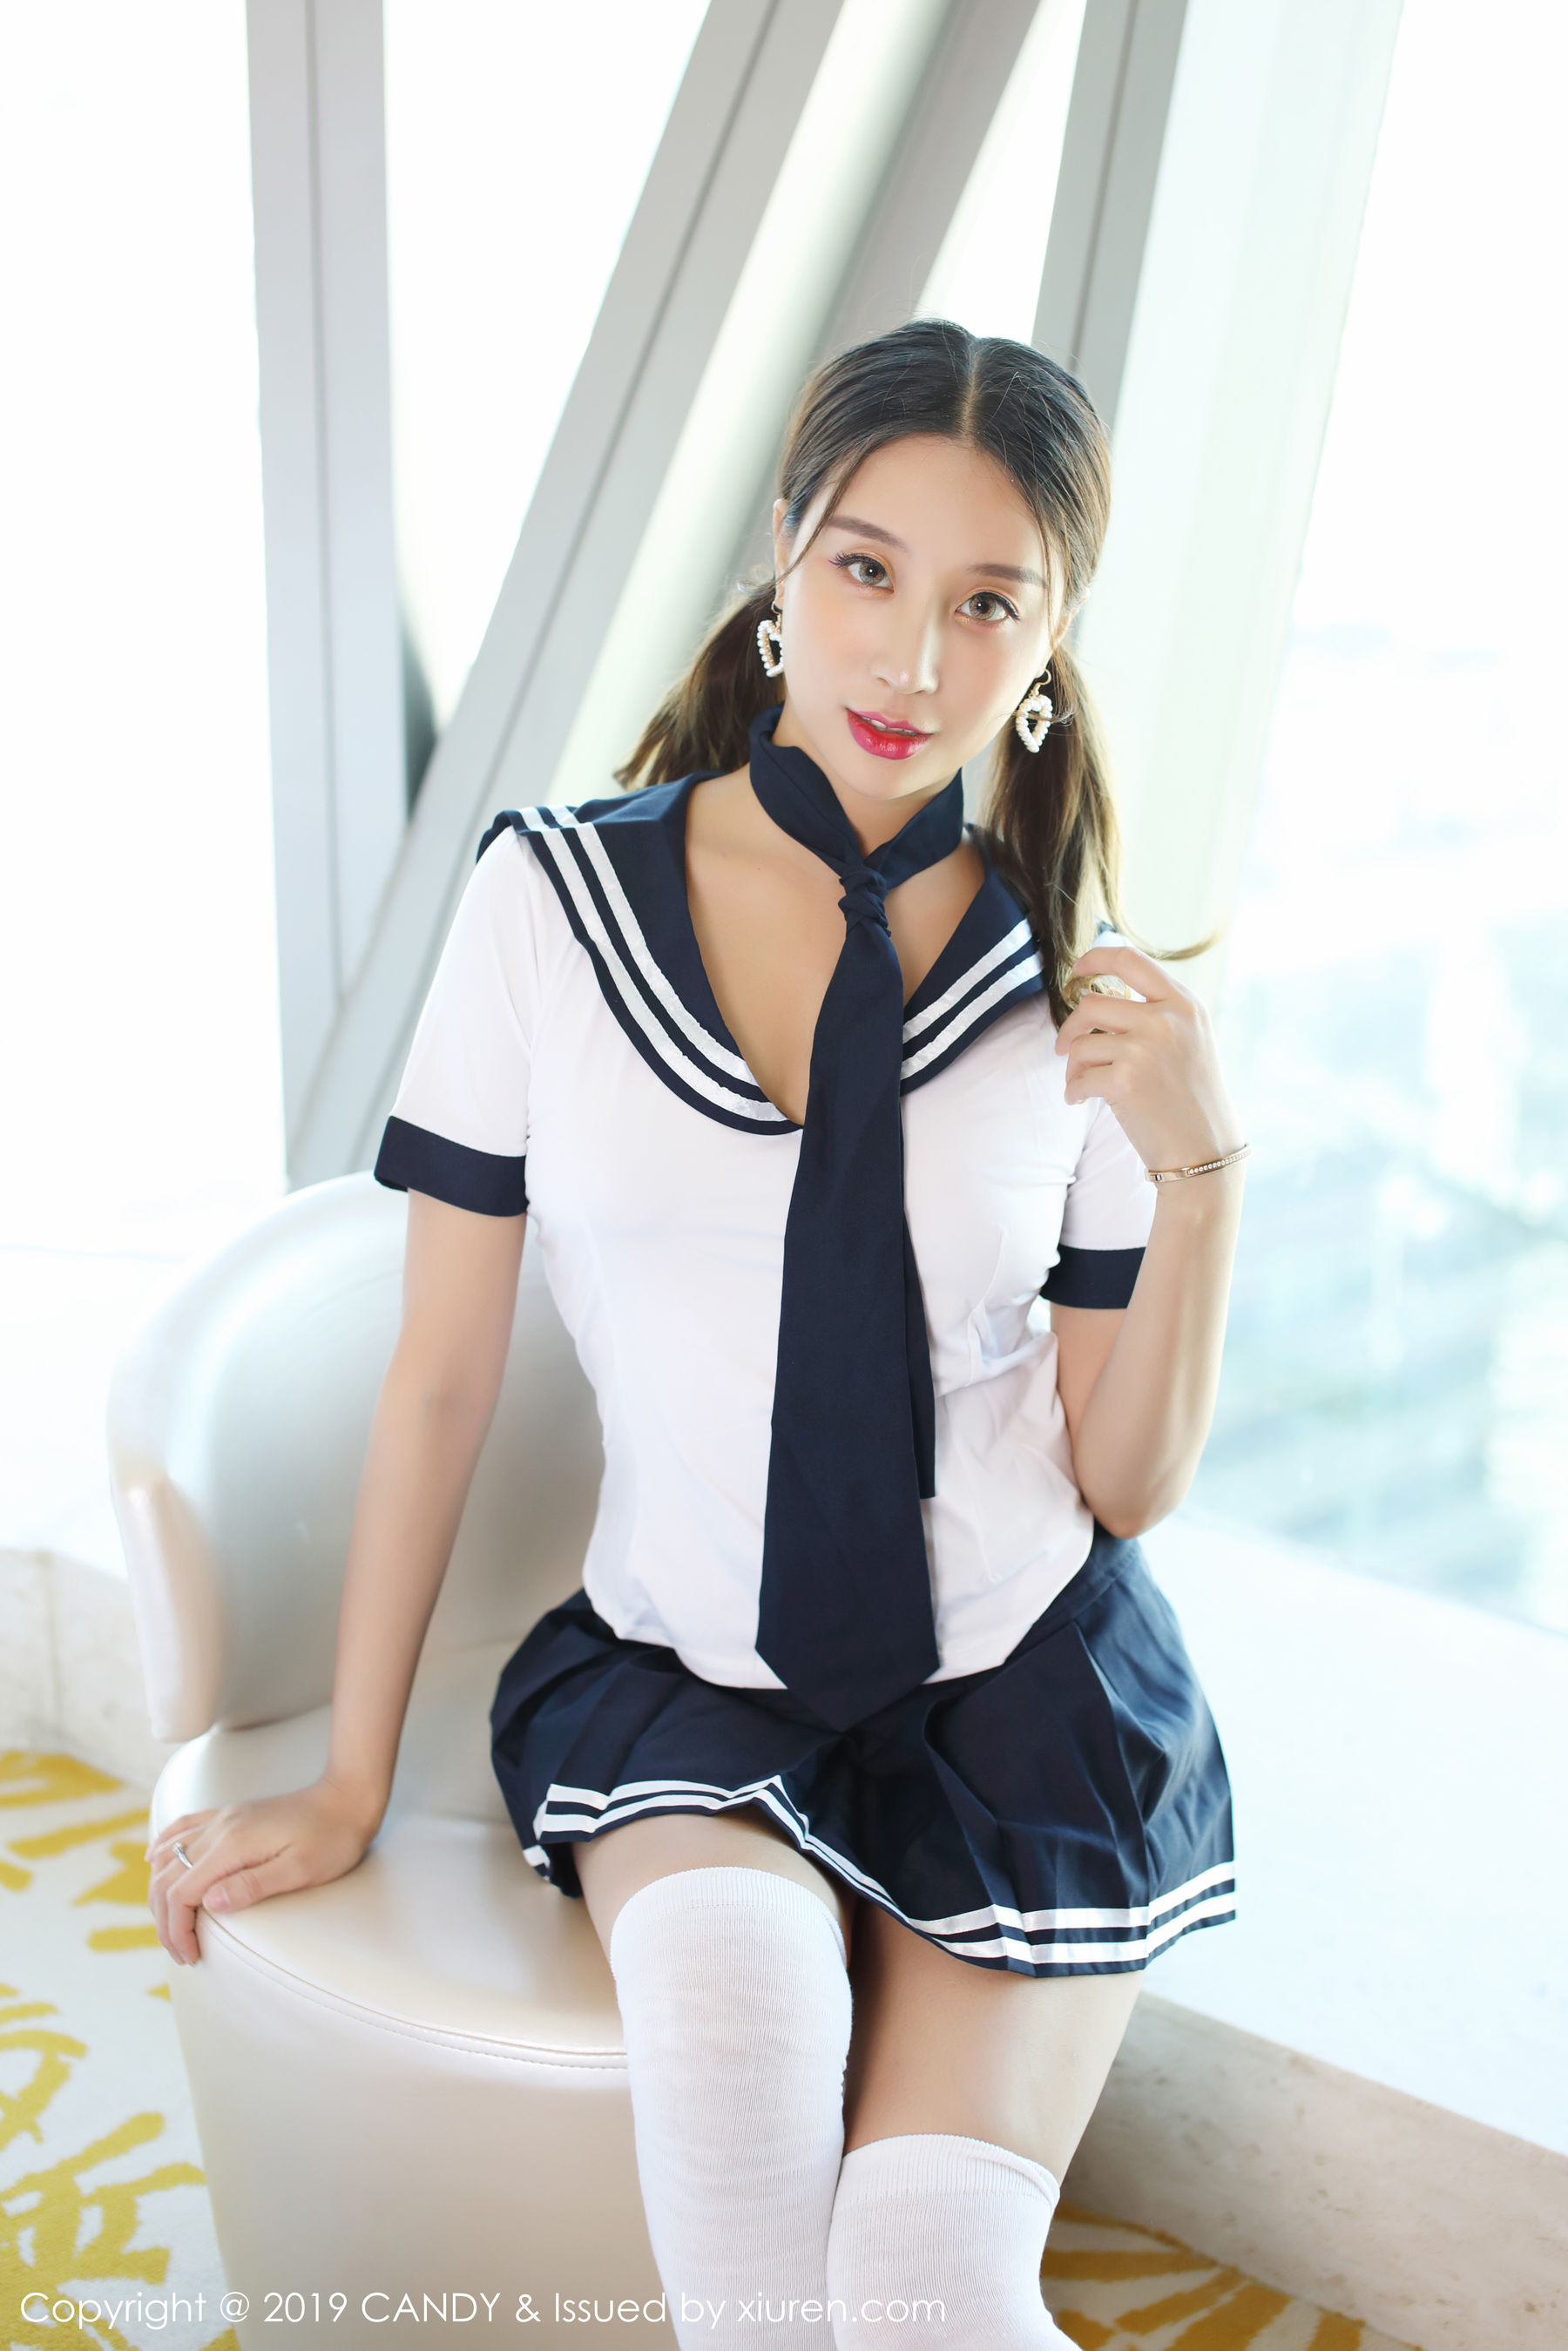 Xiaohui “Pure Student Uniform and Thong” (Candy Pictorial CANDY) Vol.073 Photo Album